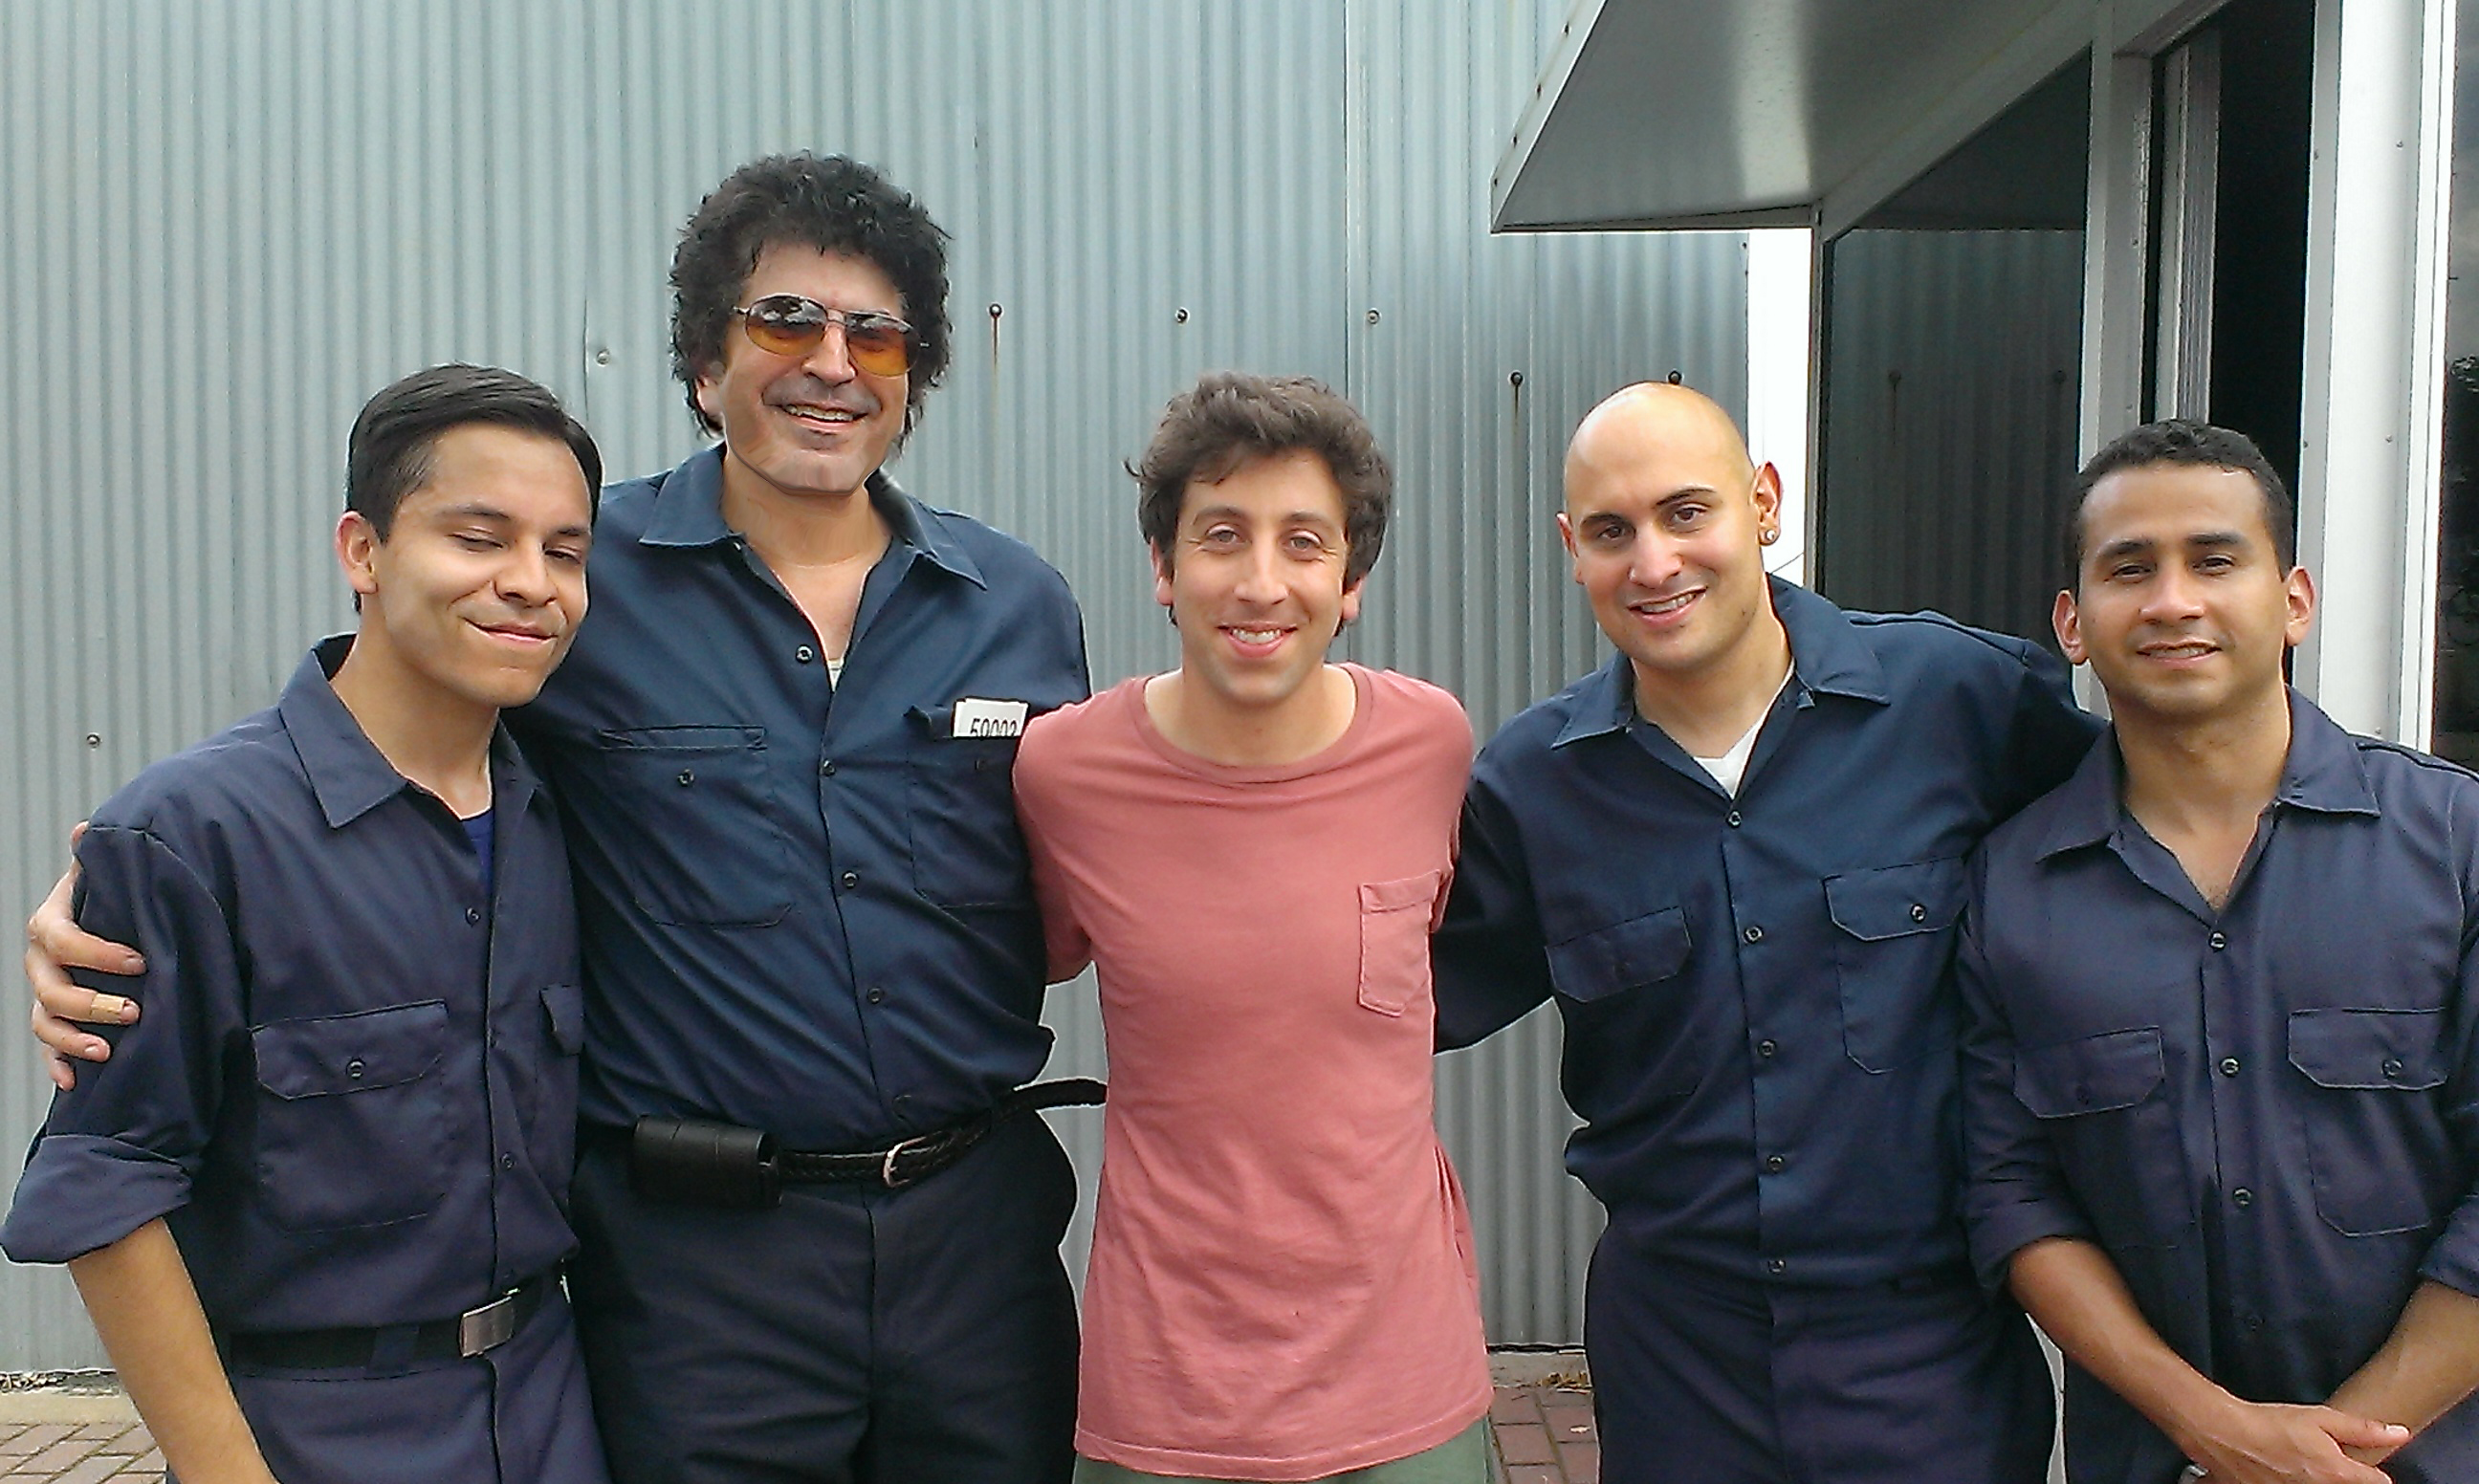 Here I am with Simon Helberg of the 